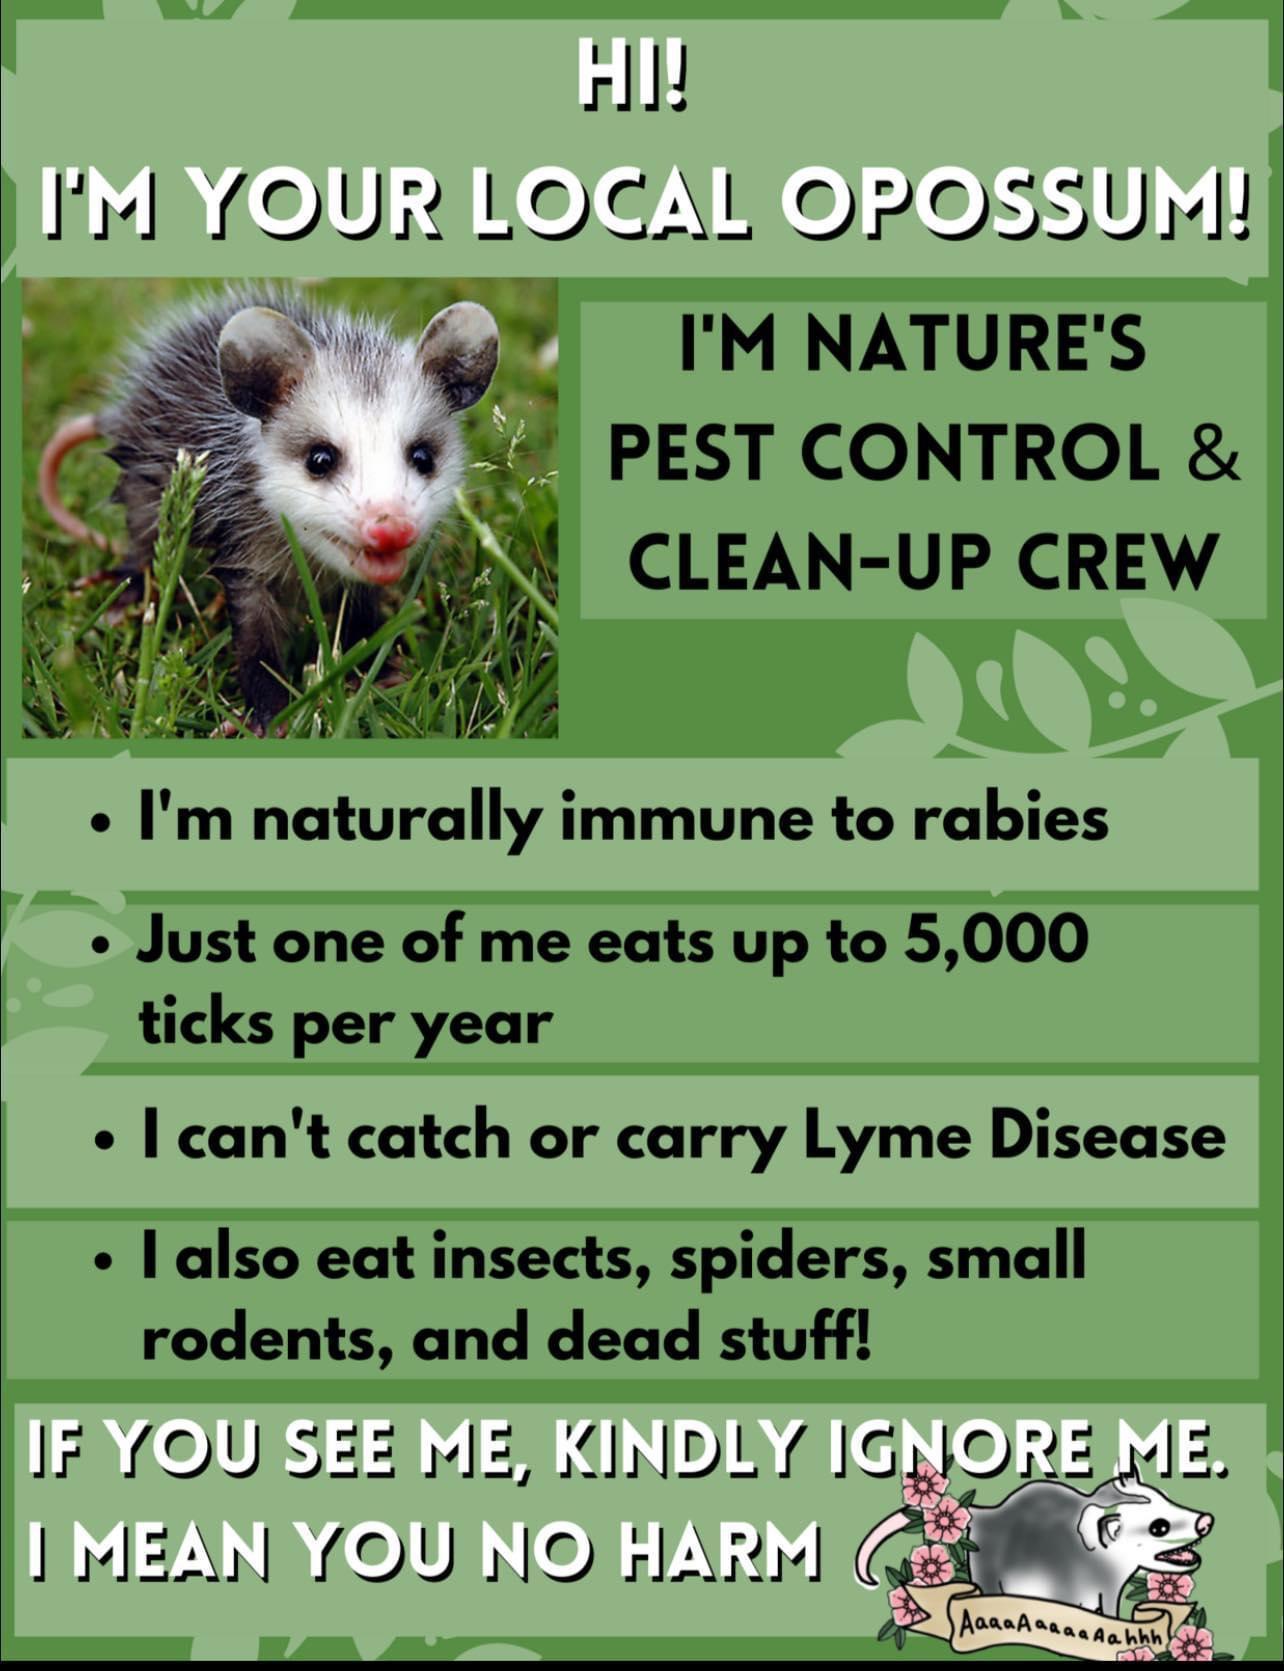 opossums are your friends - Hi! I'M Your Local Opossum! I'M Nature'S Pest Control & CleanUp Crew . I'm naturally immune to rabies Just one of me eats up to 5,000 ticks per year I can't catch or carry Lyme Disease I also eat insects, spiders, small rodents